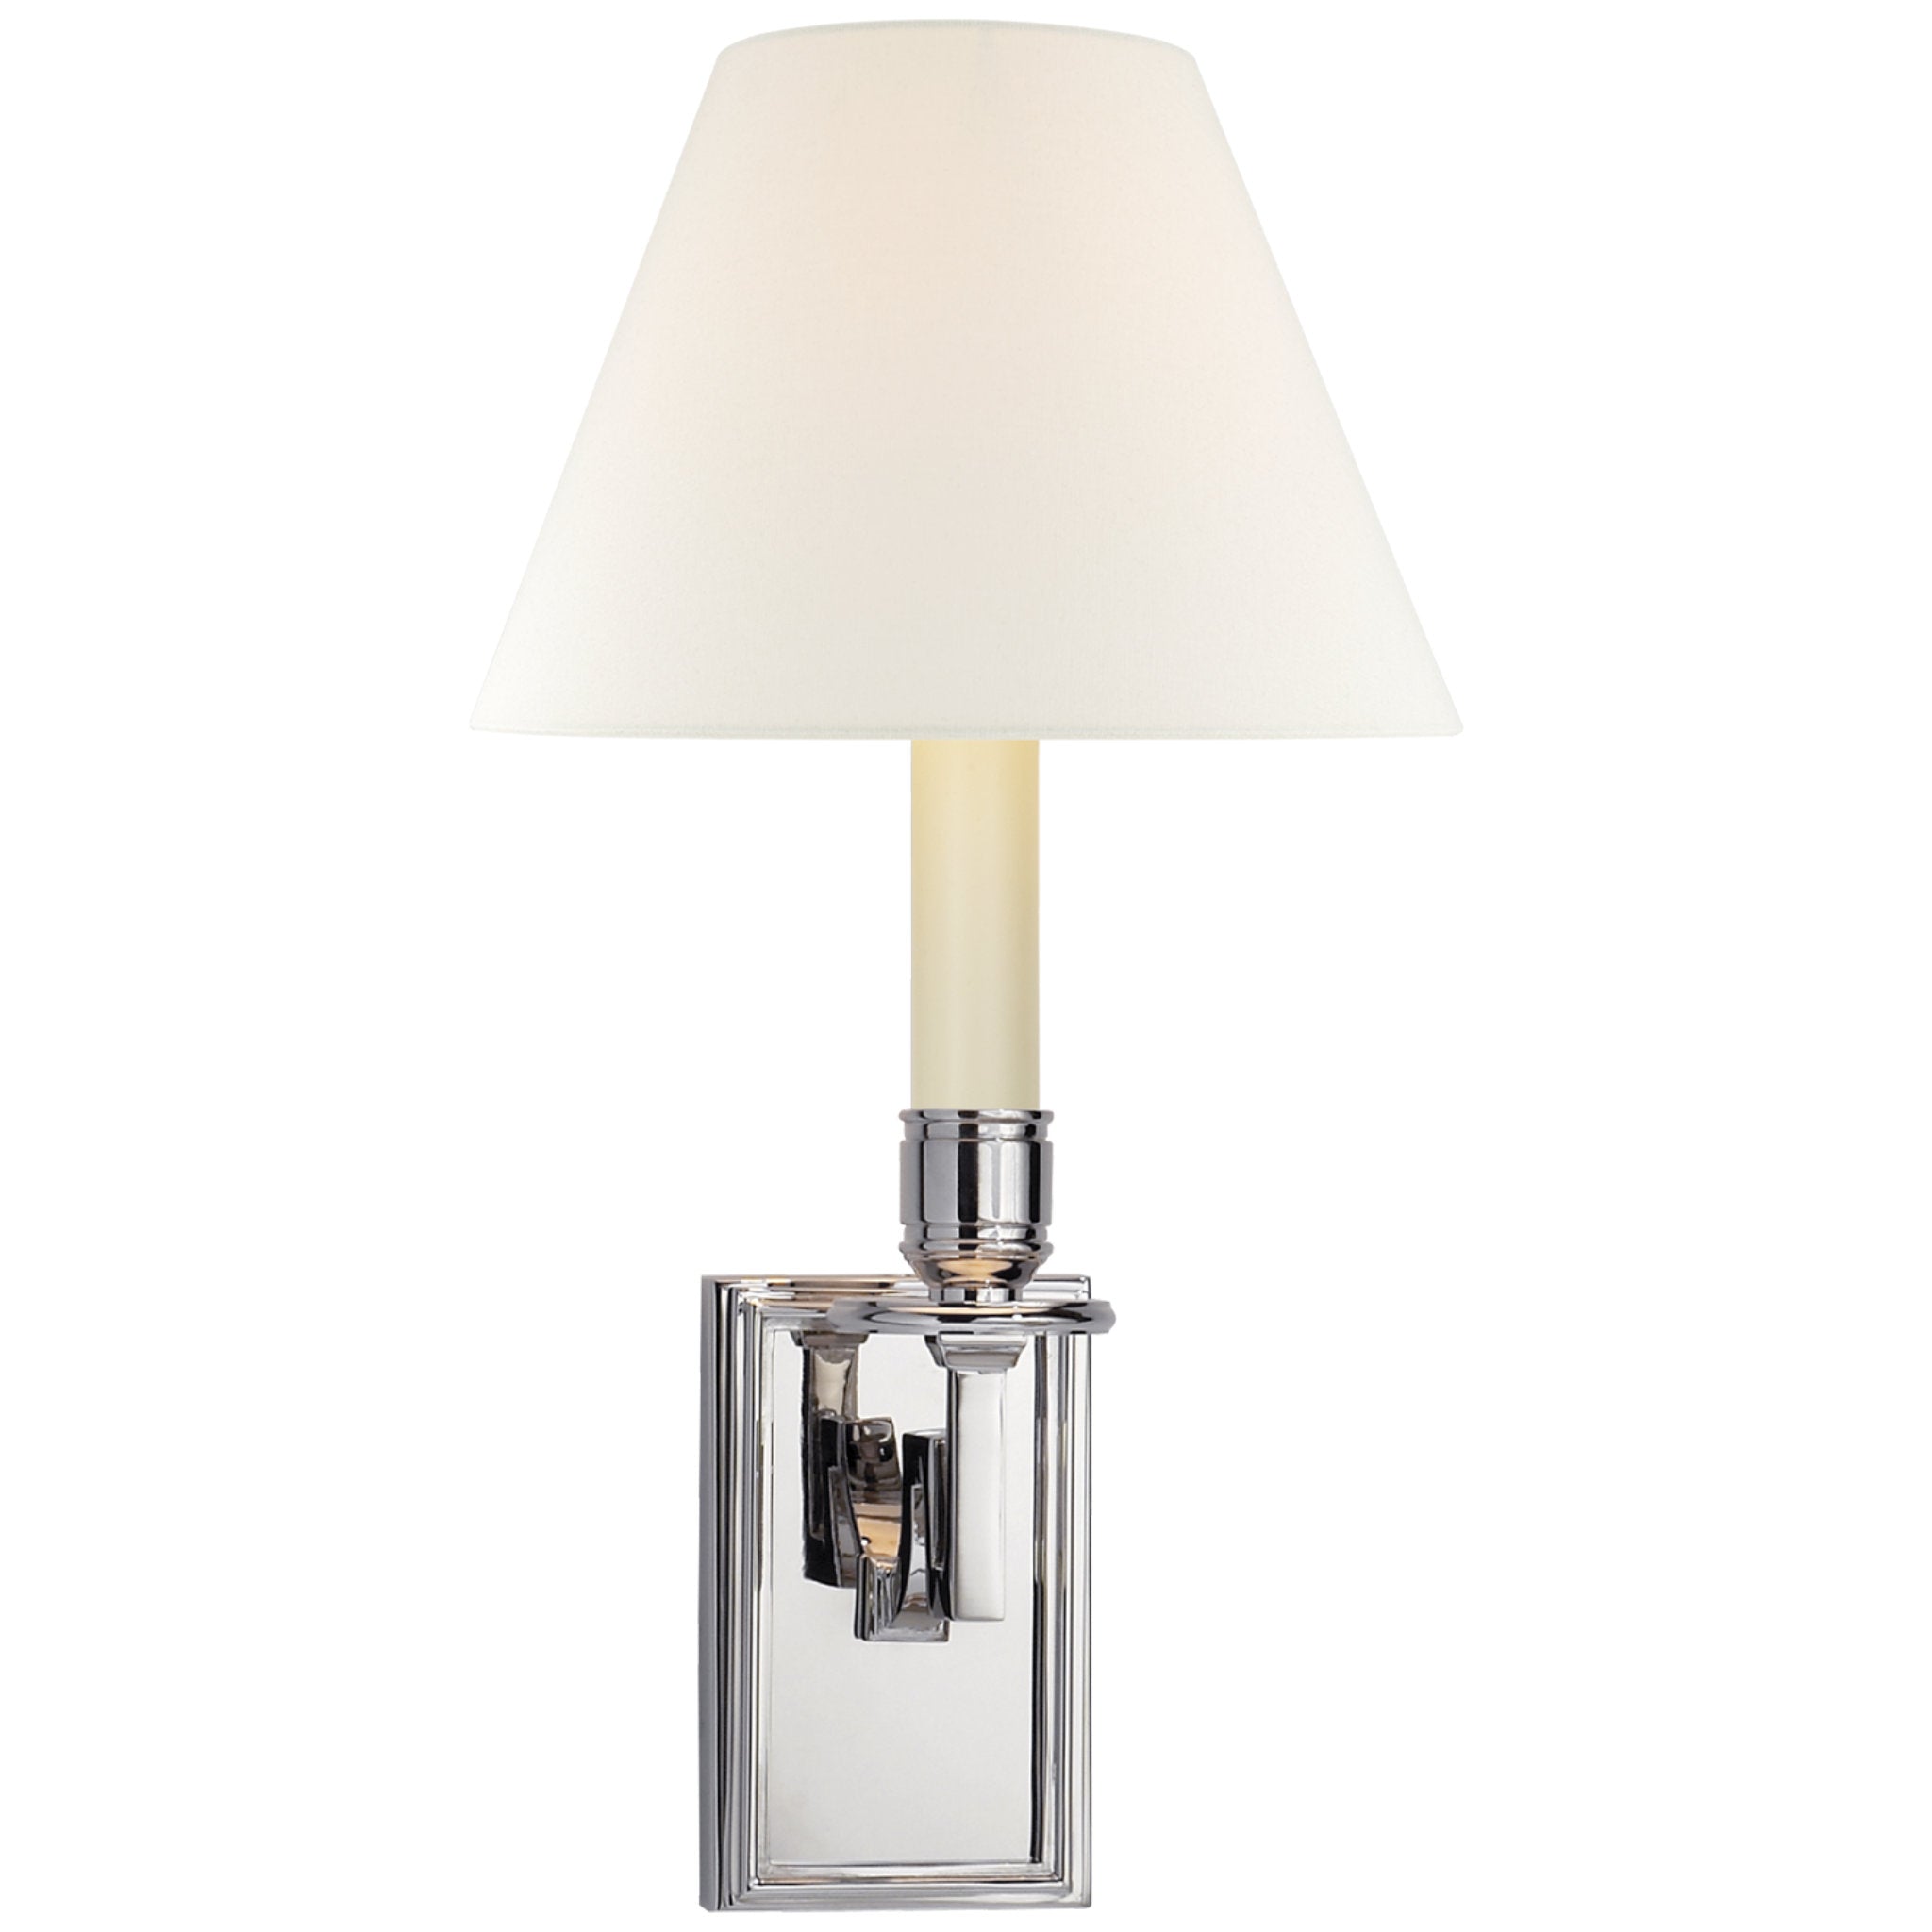 Alexa Hampton Dean Library Sconce in Polished Nickel with Linen Shade